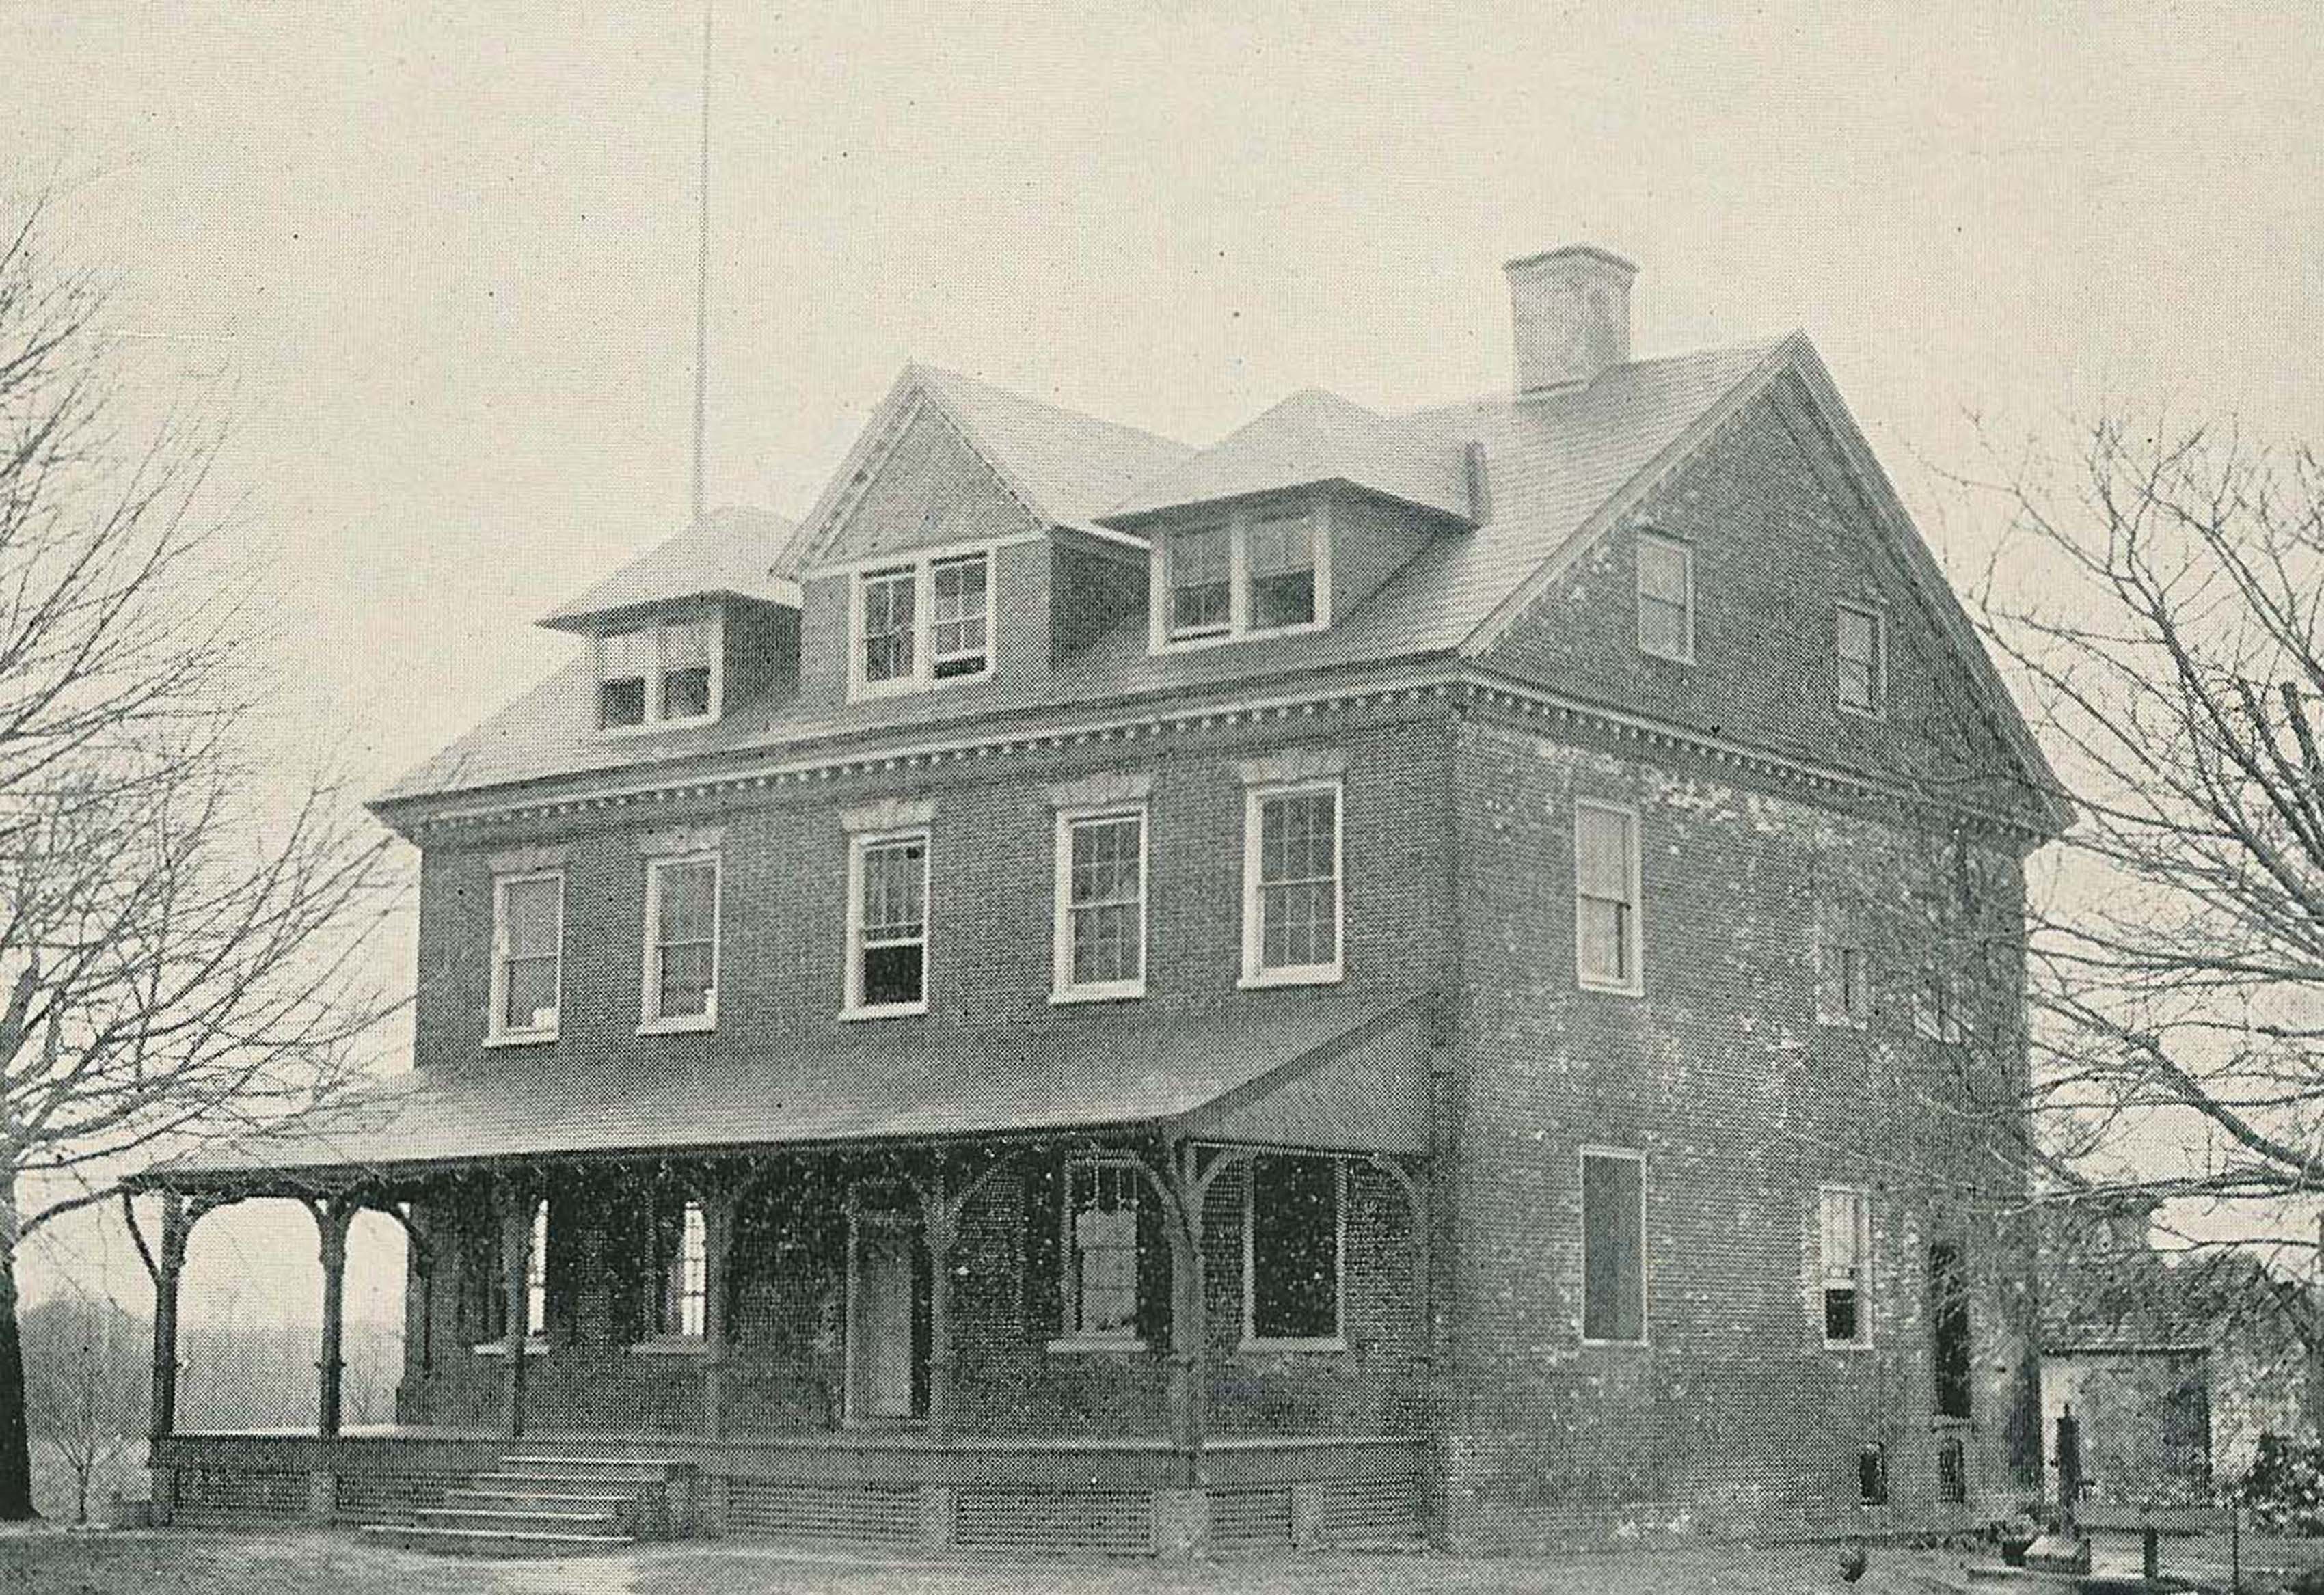 Inherited in the 1891 purchase of the property, the Board of Trustees had the former mansion renovated to become the Main College Building (now preserved as Loockerman Hall). 